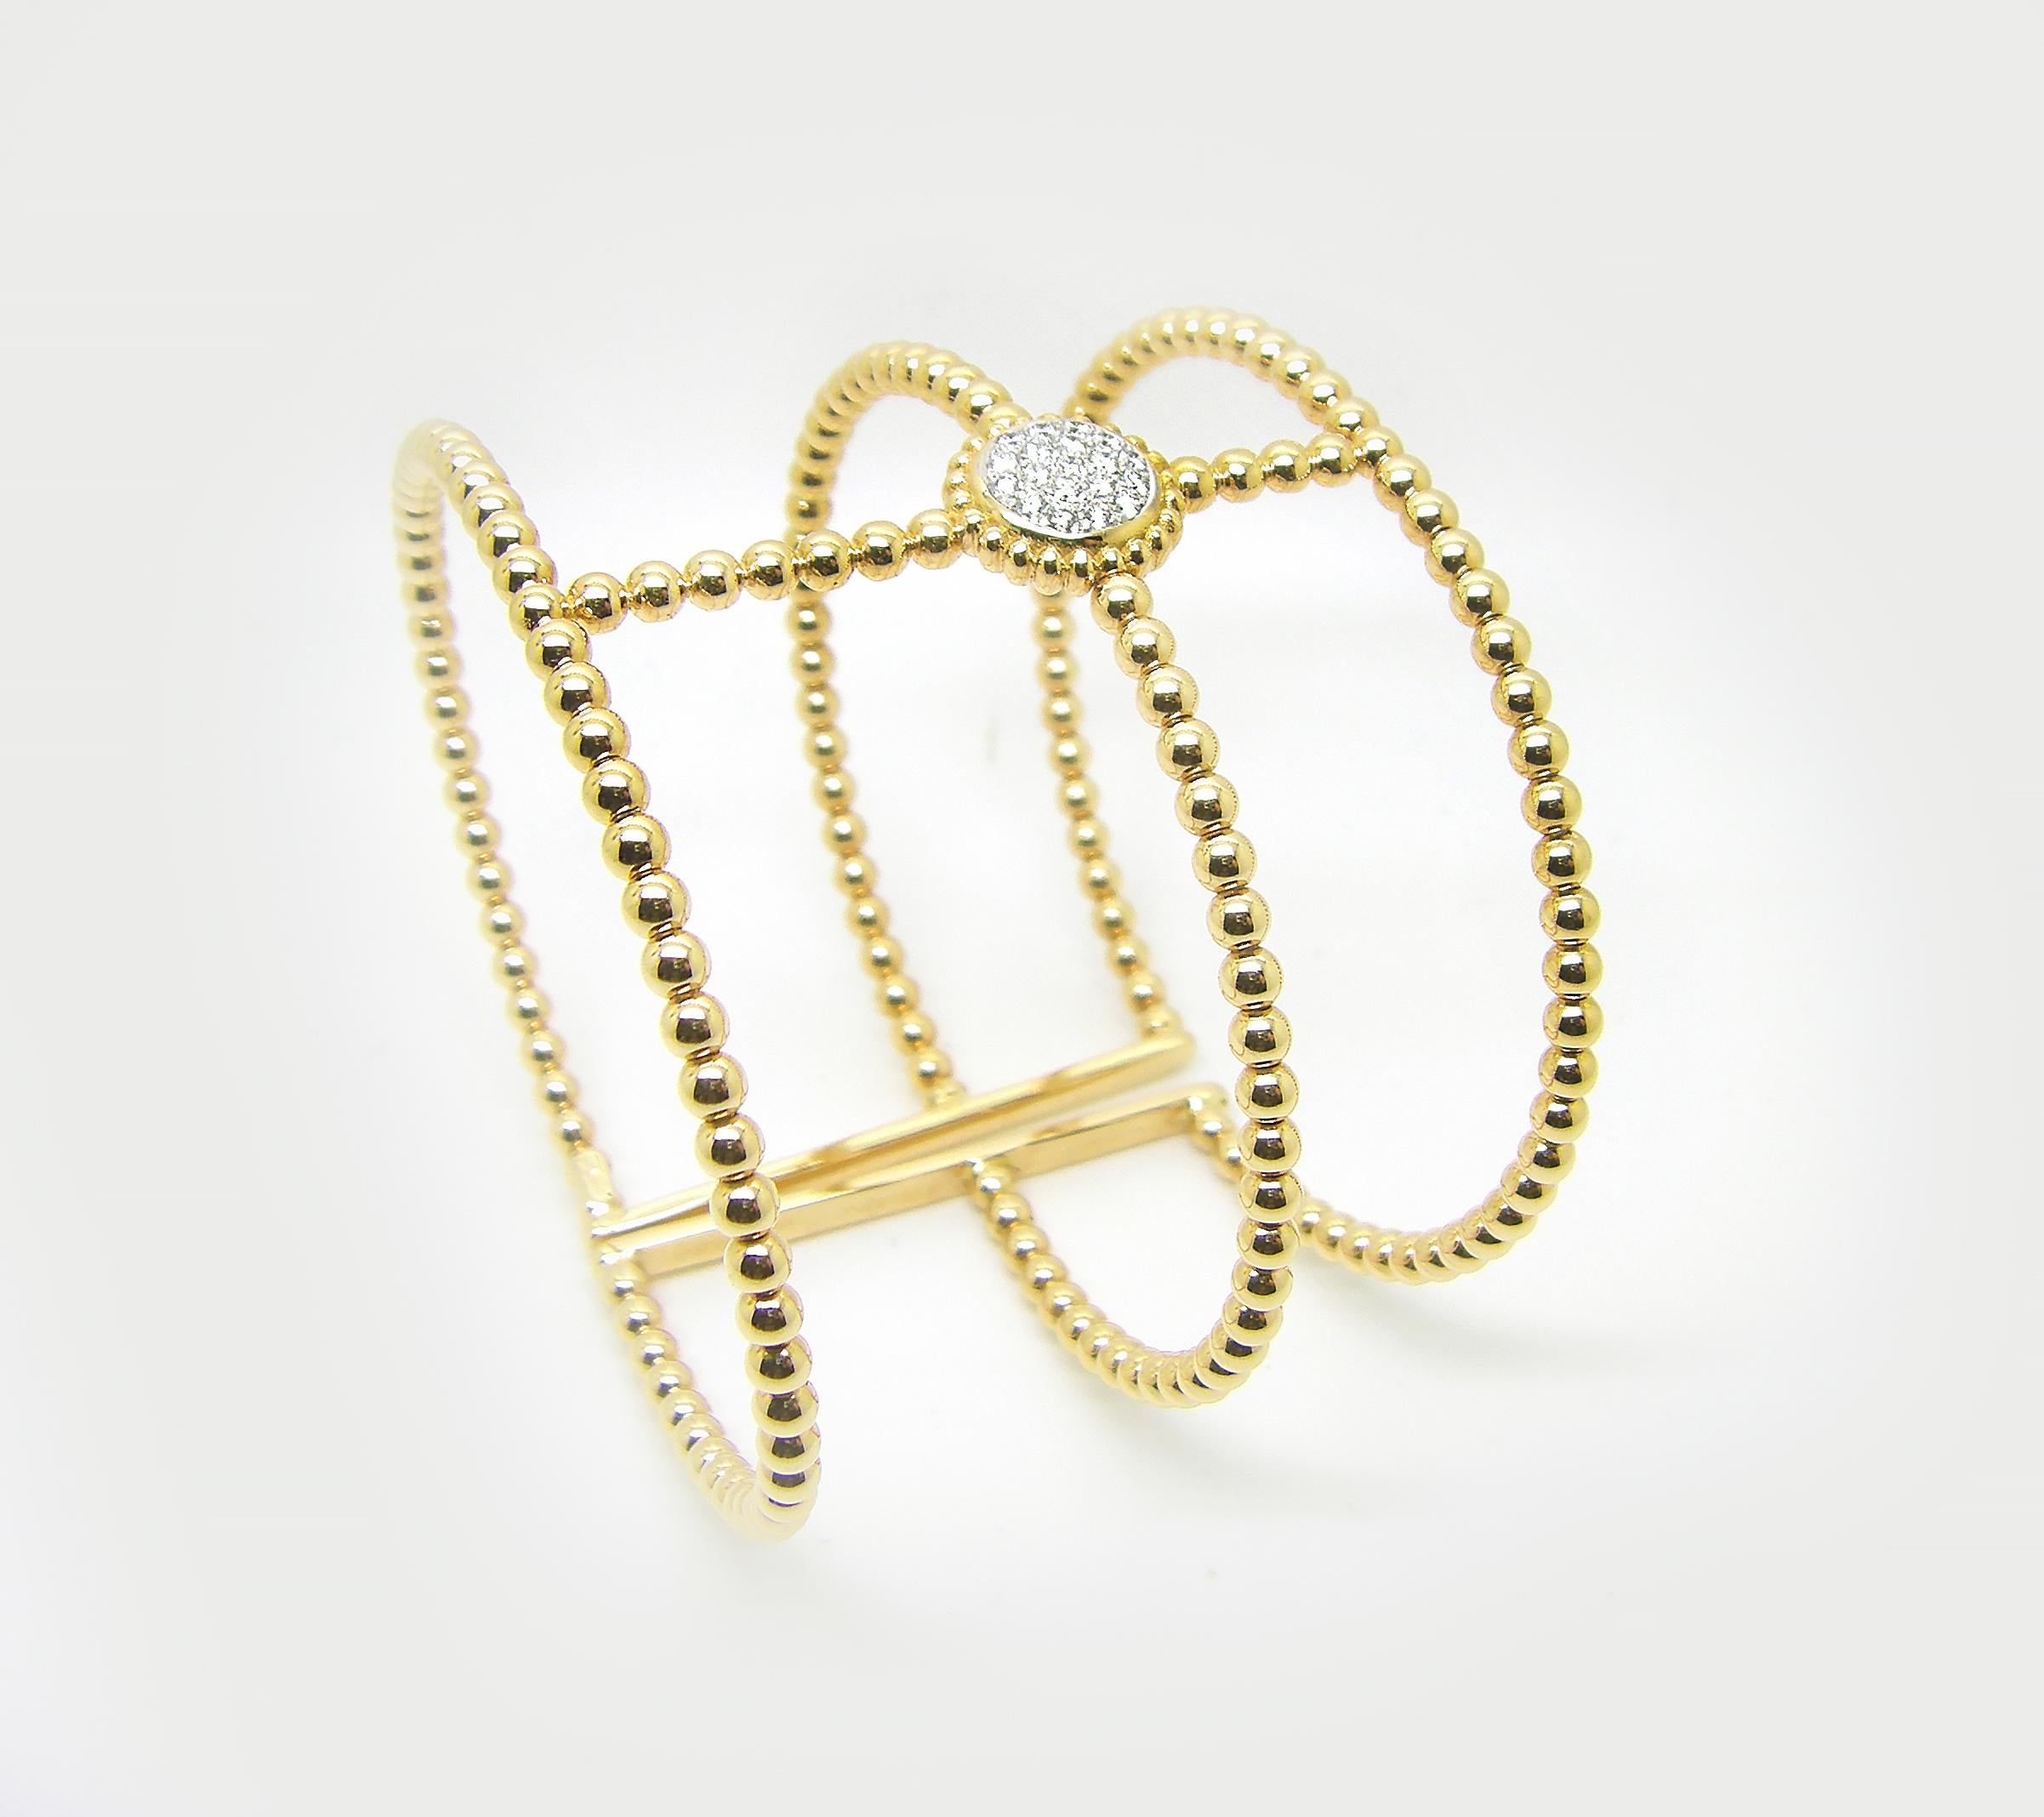 This S.Georgios designer cuff bracelet in solid yellow gold 18 karats all custom made. The gorgeous wide cuff is made of three bangles connected together in a unique way and all have the flexibility to open and close. In the center, we have set in a